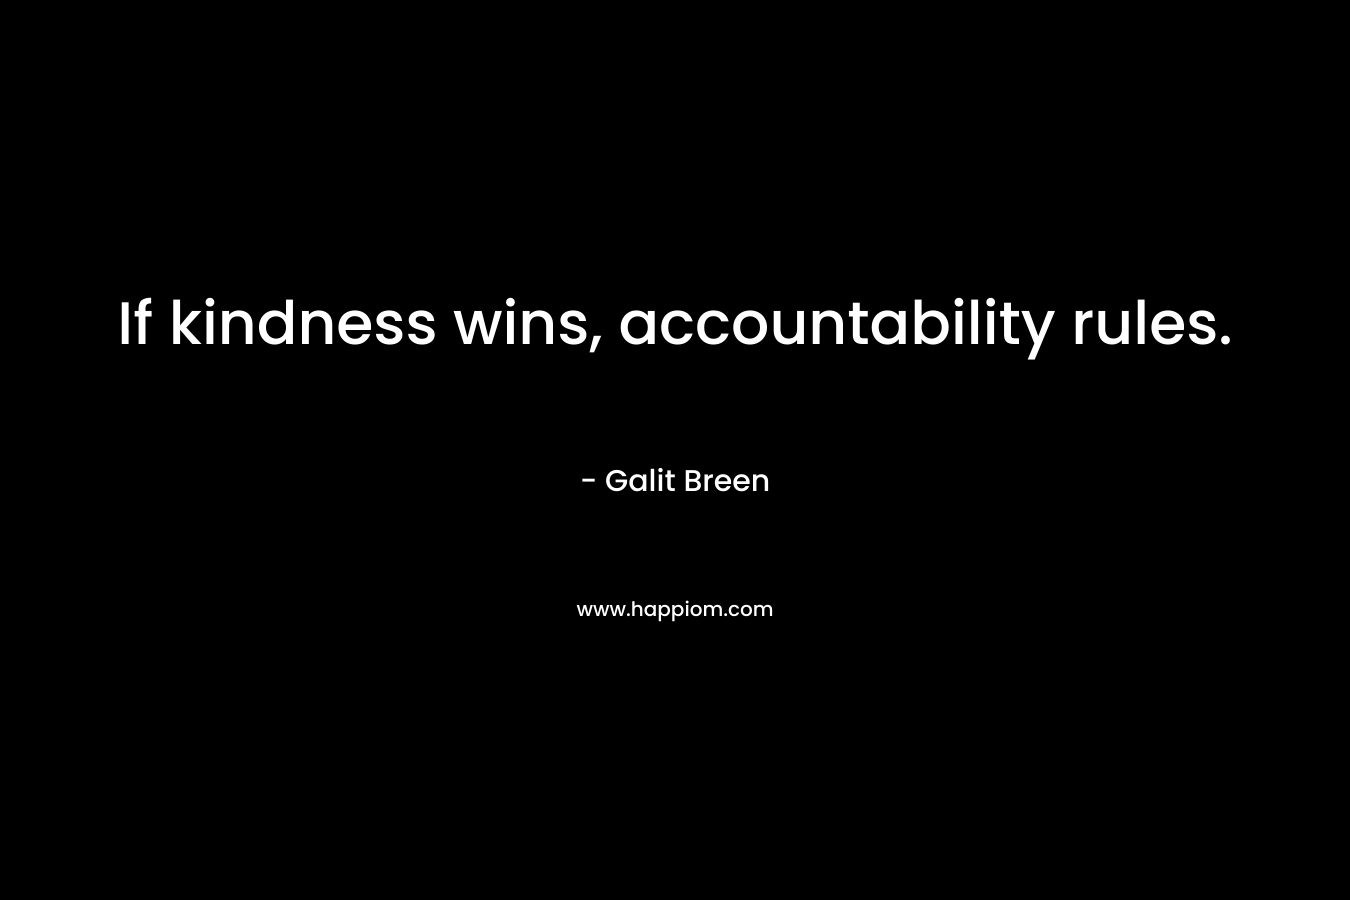 If kindness wins, accountability rules.